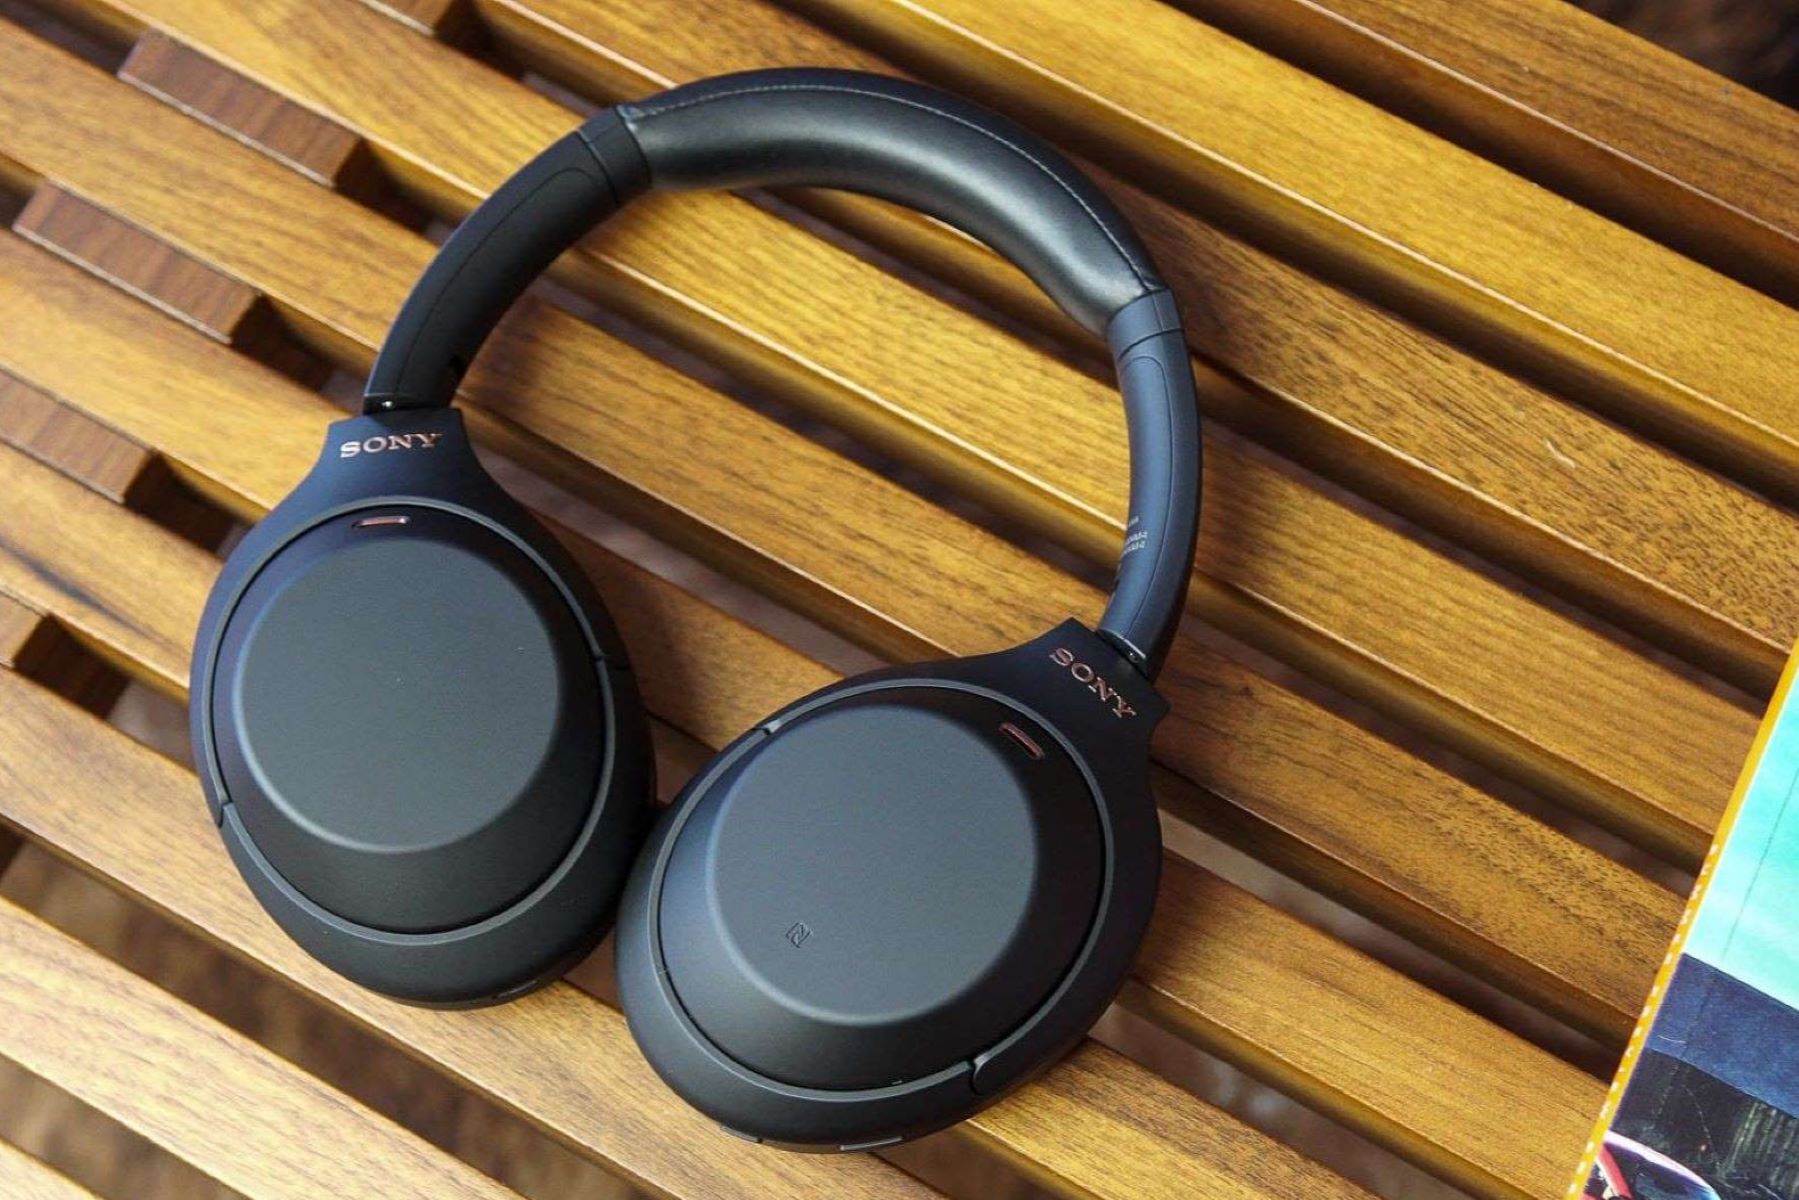 Sony Headset Pairing: A Step-by-Step Guide